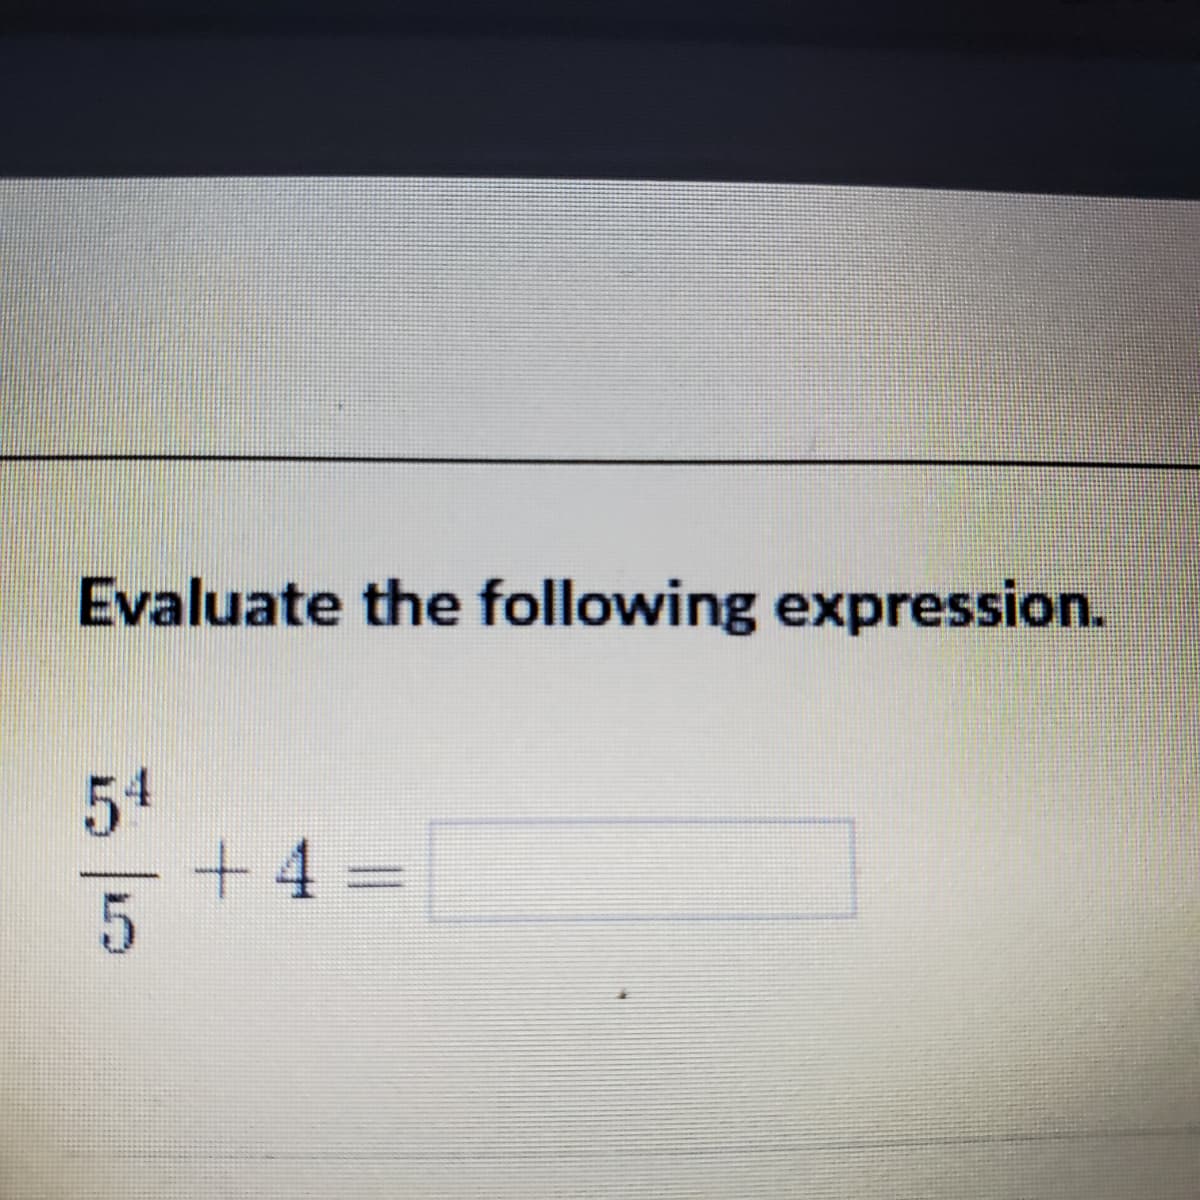 Evaluate the following expression.
54
+4
